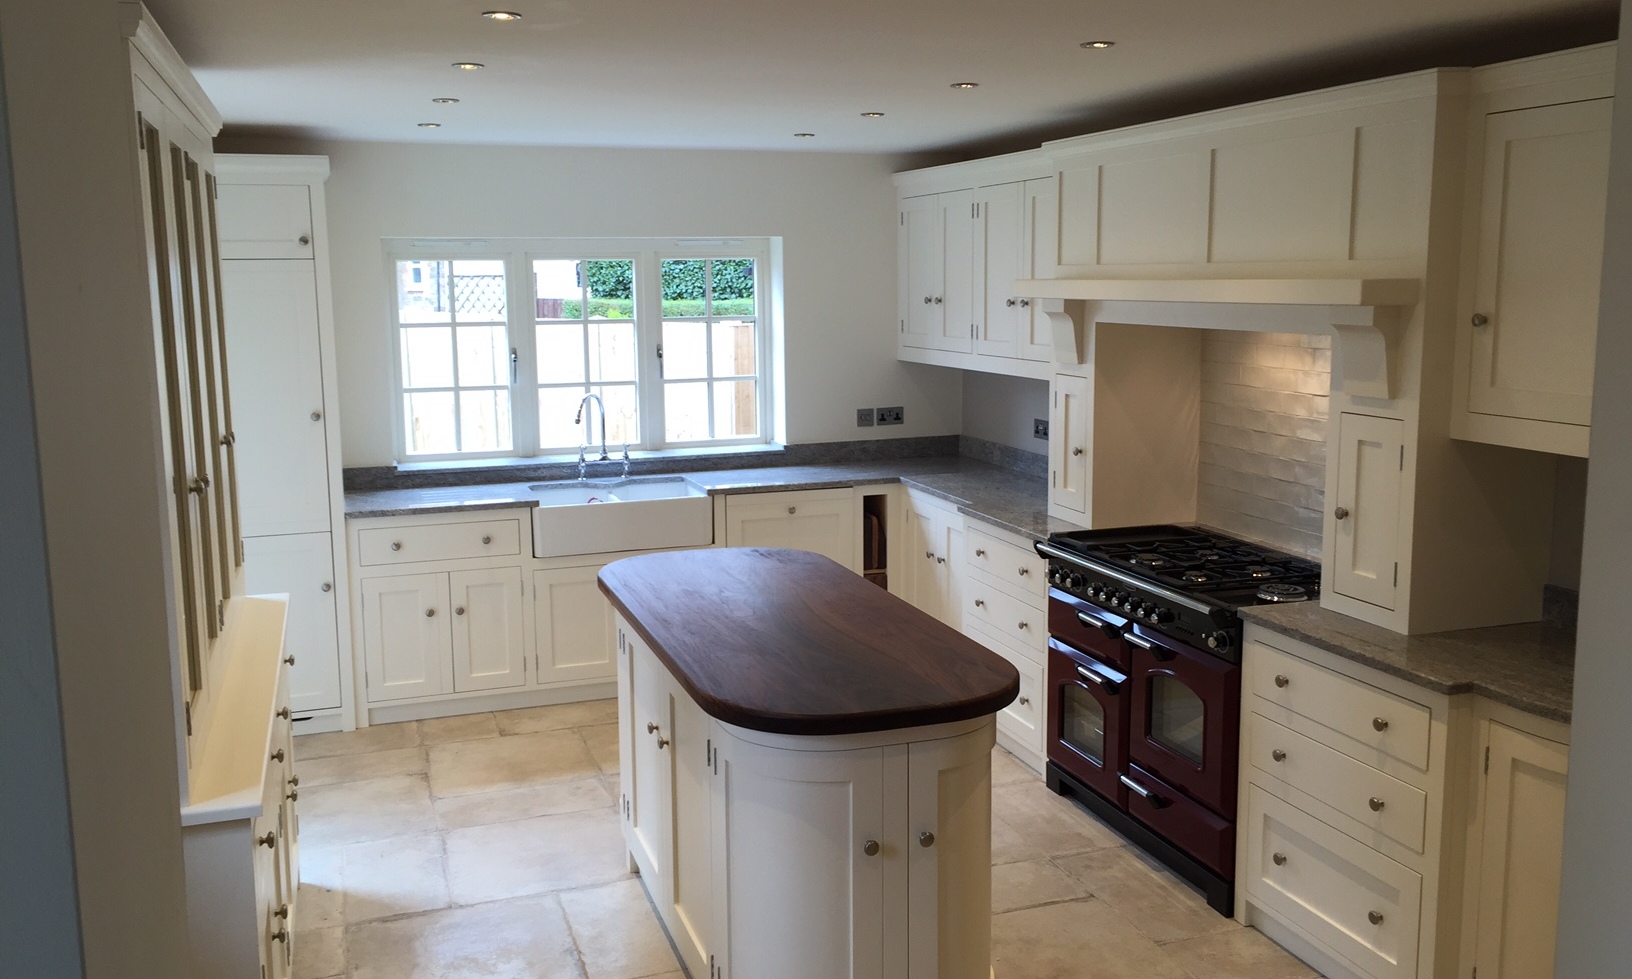 Made to measure solid wood shaker style kitchen in solid wood hand built at our factory in Nottingham Painted in Farrow&Ball Pointing.Bespoke island site with solid wood black walnut top.